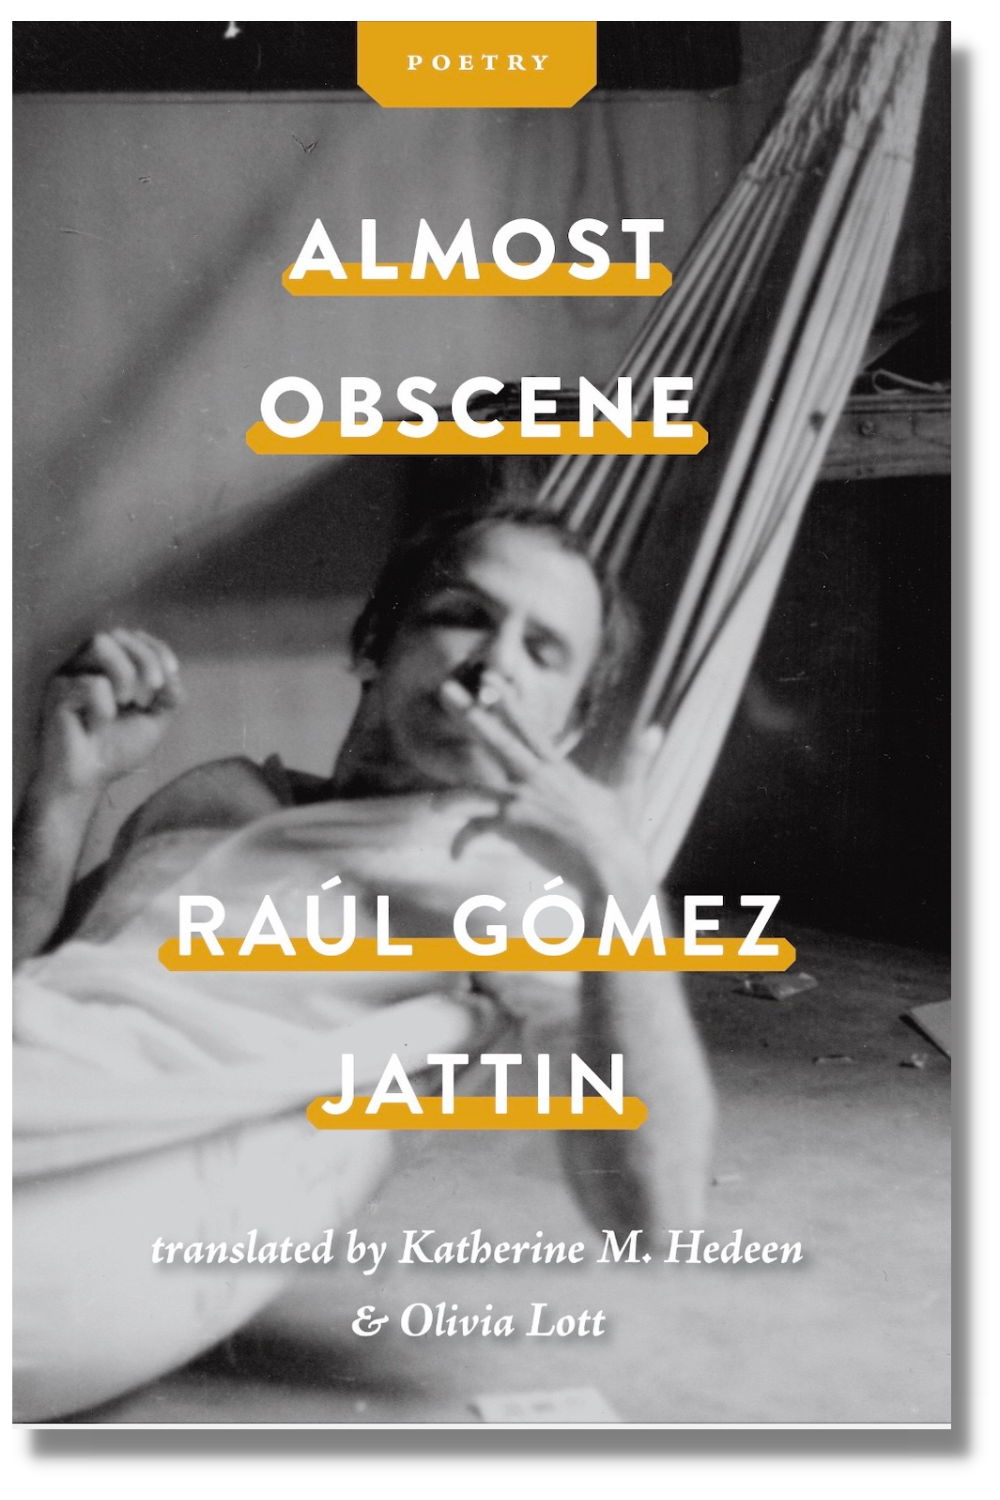 The cover of "Almost Obscene"